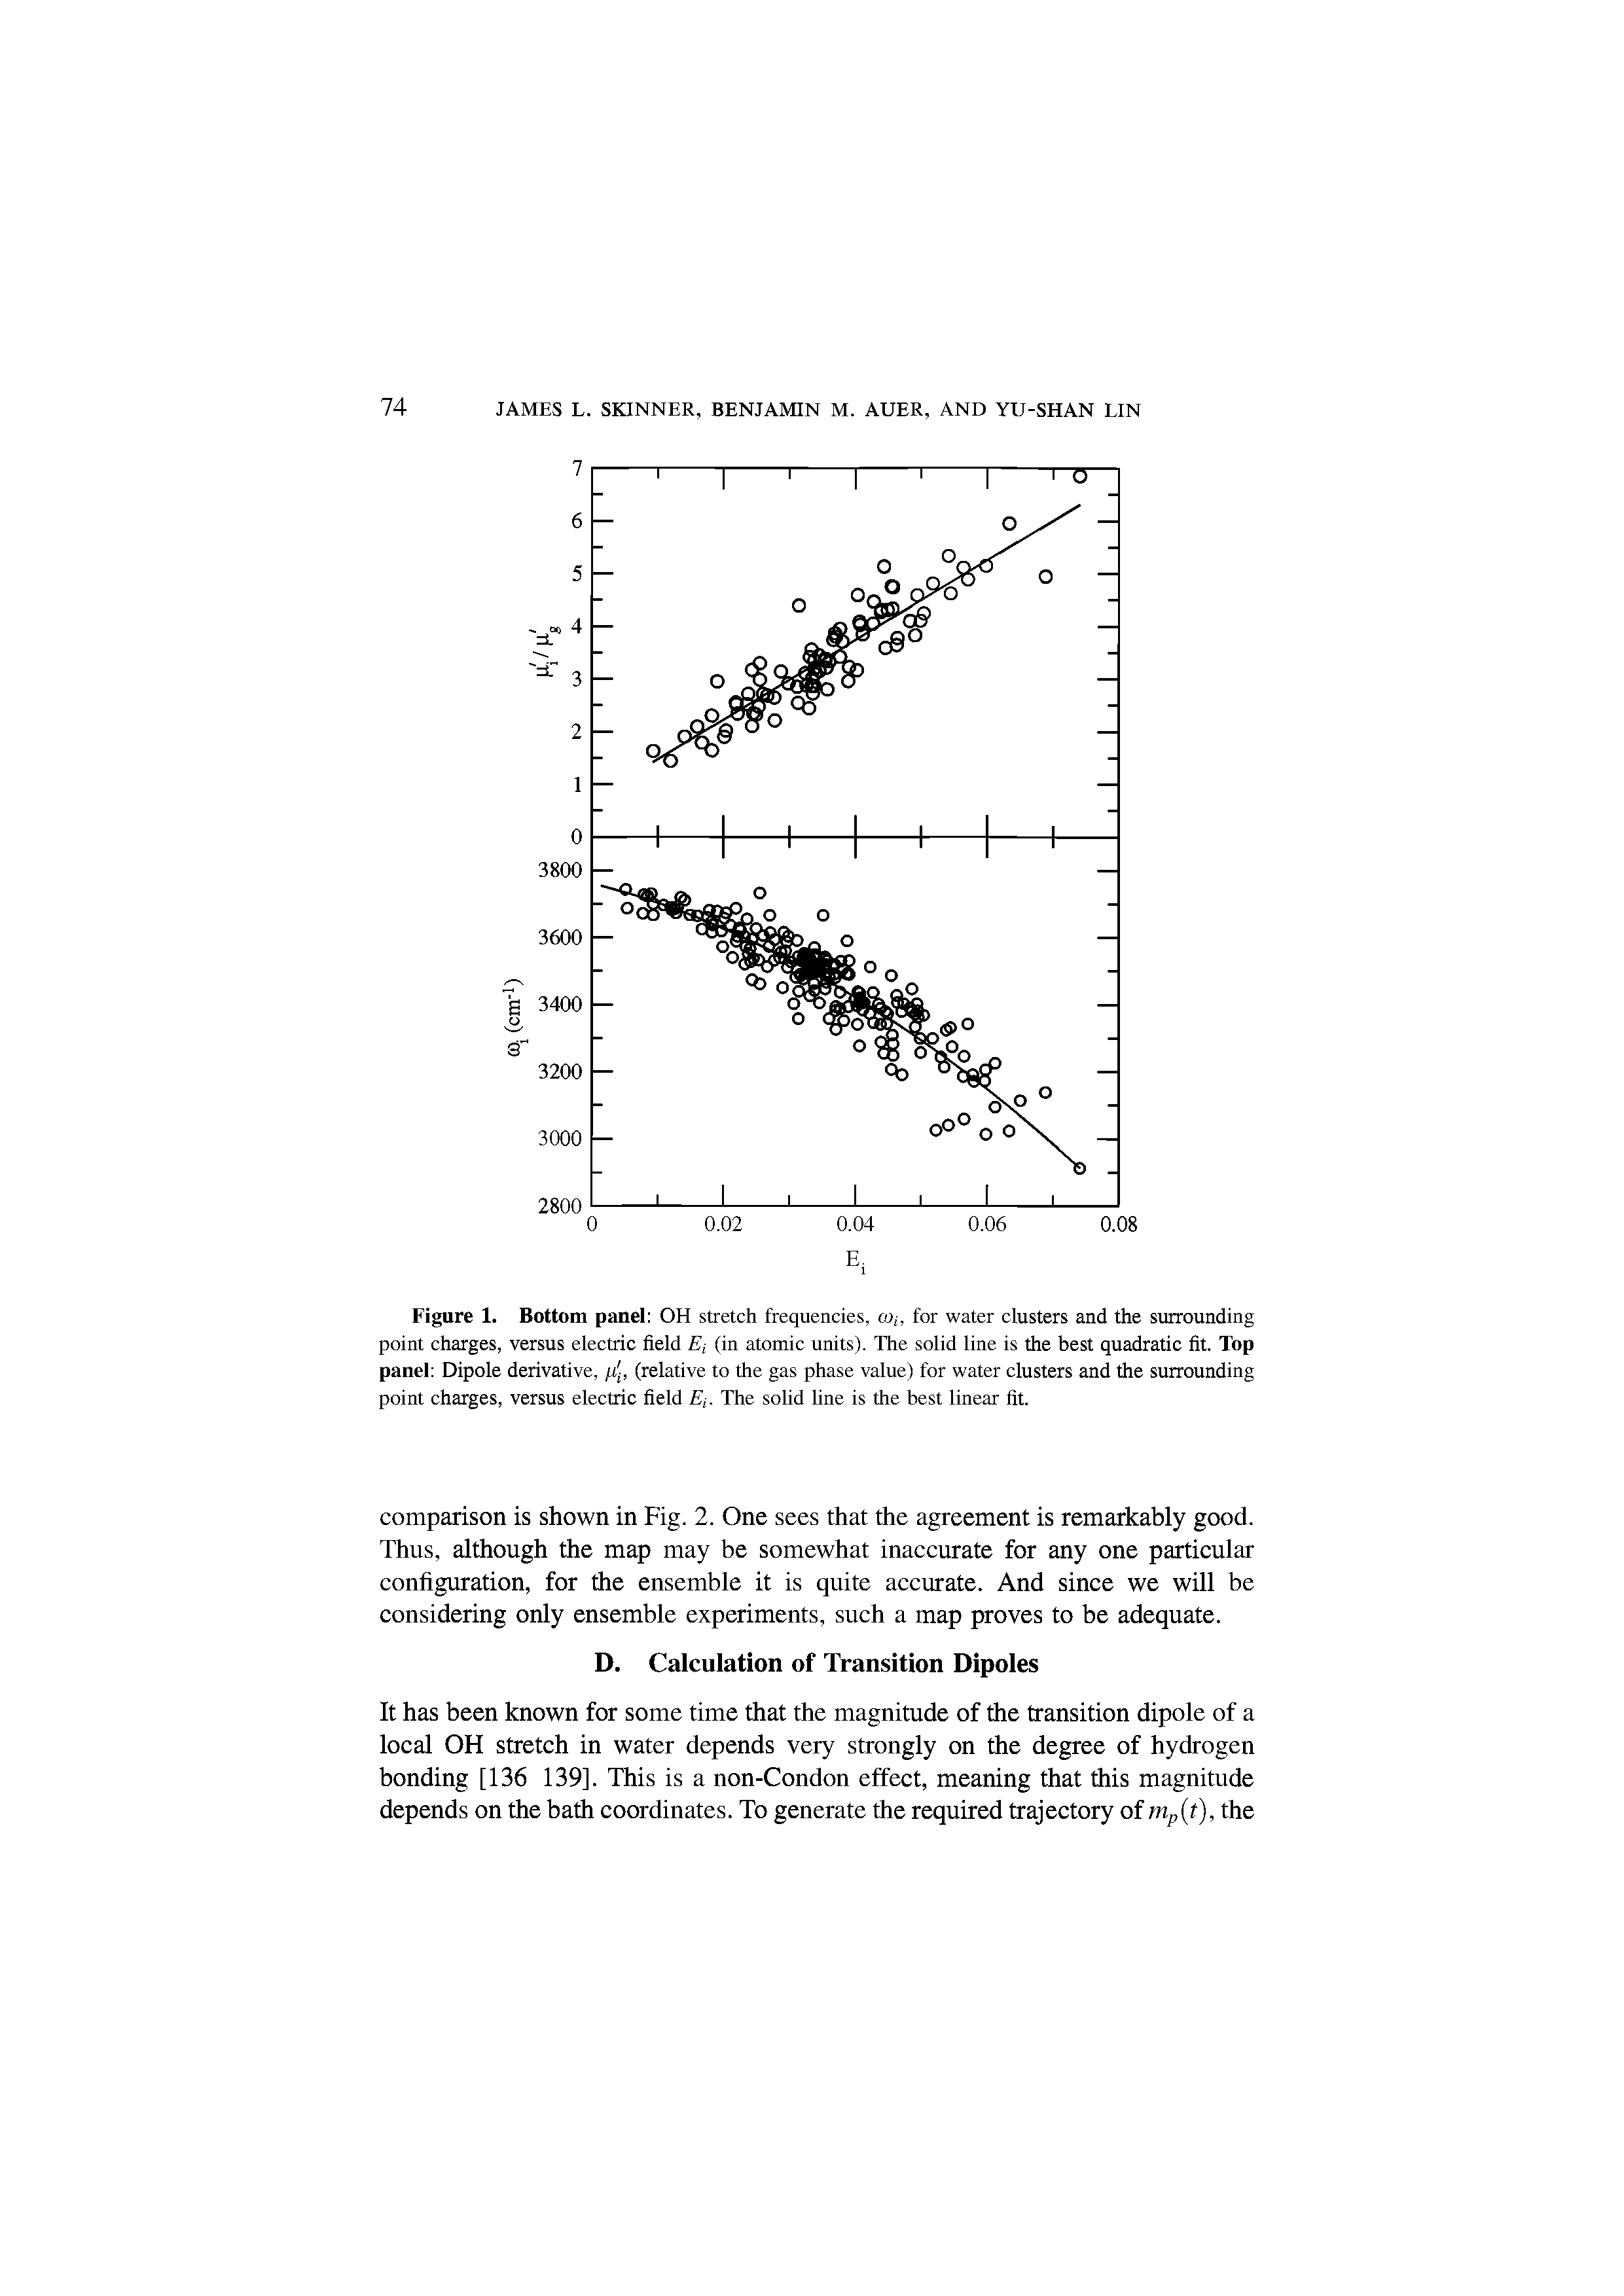 Figure 1. Bottom panel OH stretch frequencies, to , for water clusters and the surrounding point charges, versus electric field ) (in atomic units). The solid line is the best quadratic fit. Top panel Dipole derivative, / ], (relative to the gas phase value) for water clusters and the surrounding point charges, versus electric field ). The solid line is the best linear fit.